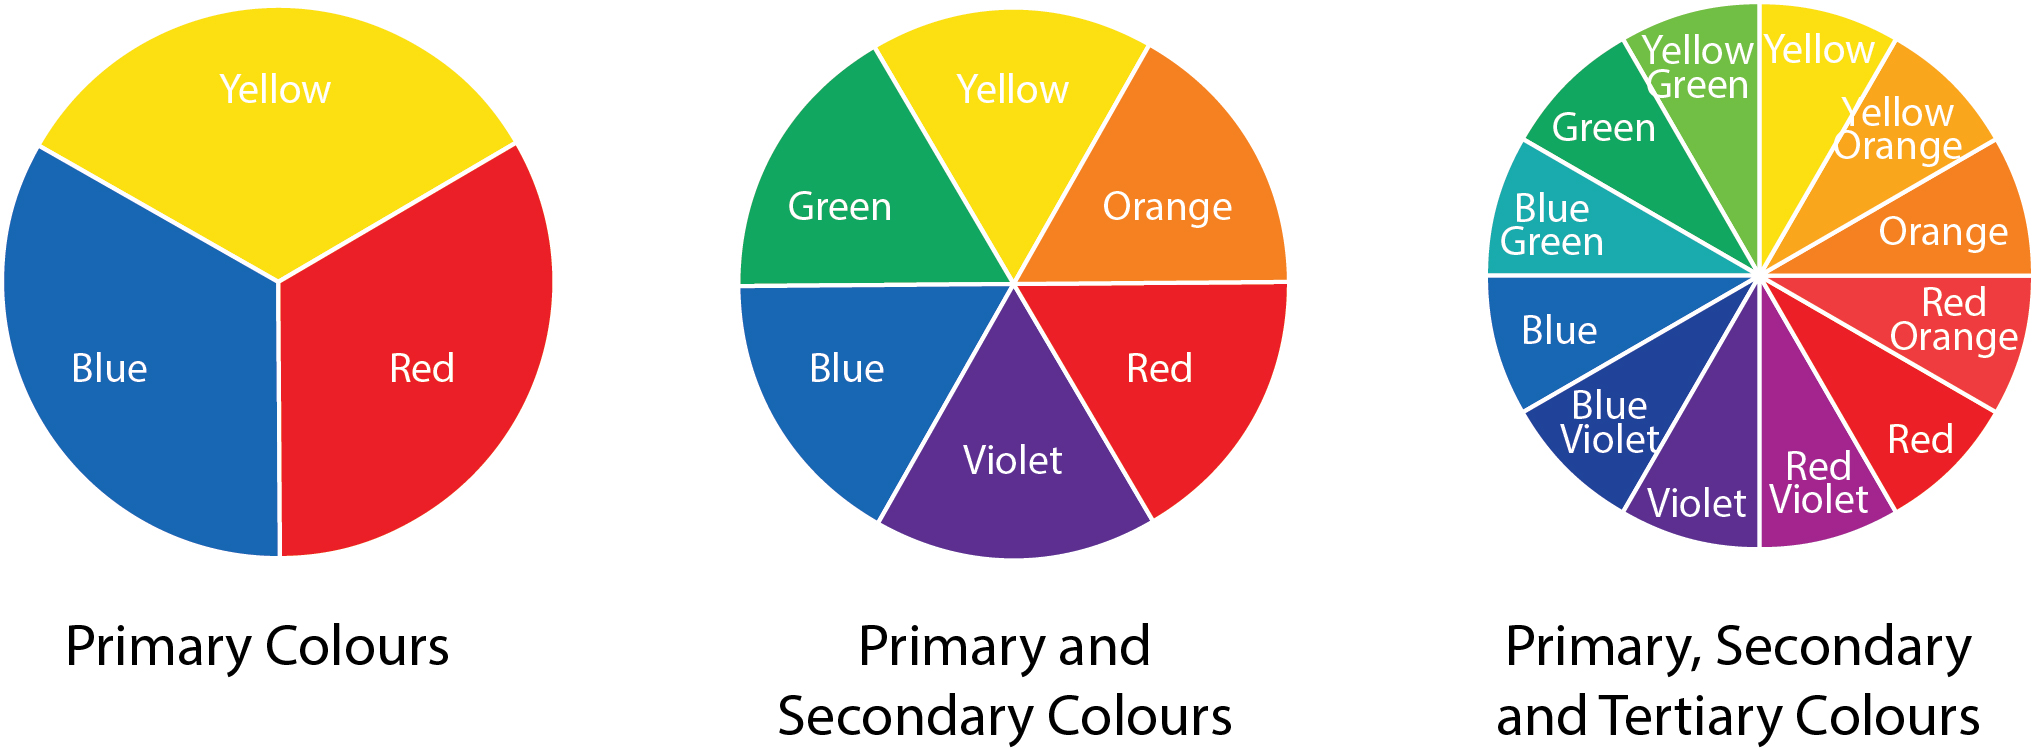 primary colors on a color wheel